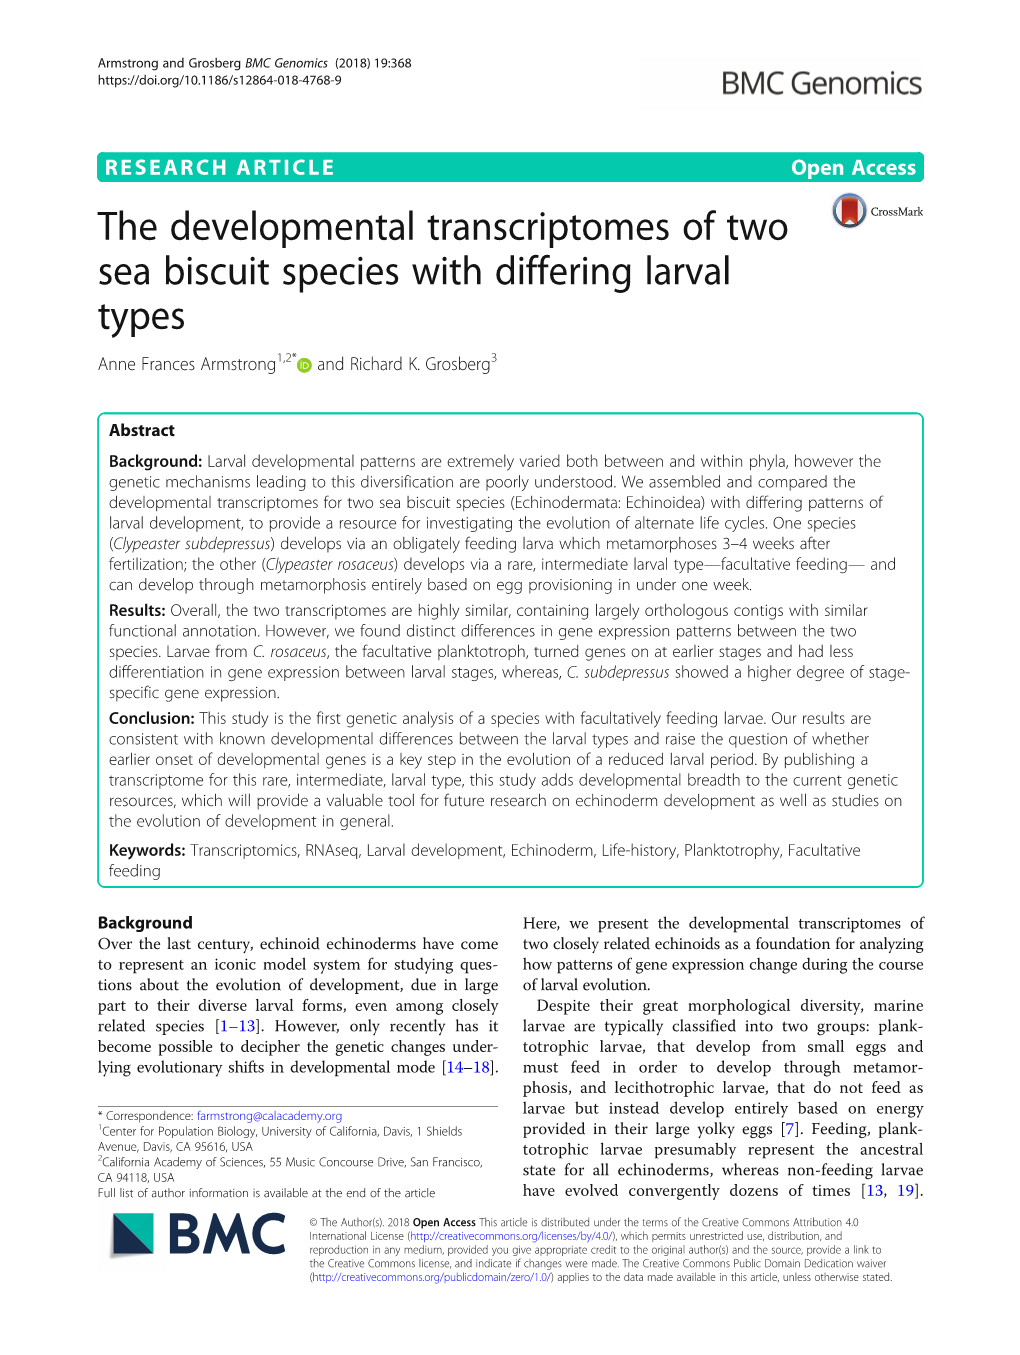 The Developmental Transcriptomes of Two Sea Biscuit Species with Differing Larval Types Anne Frances Armstrong1,2* and Richard K